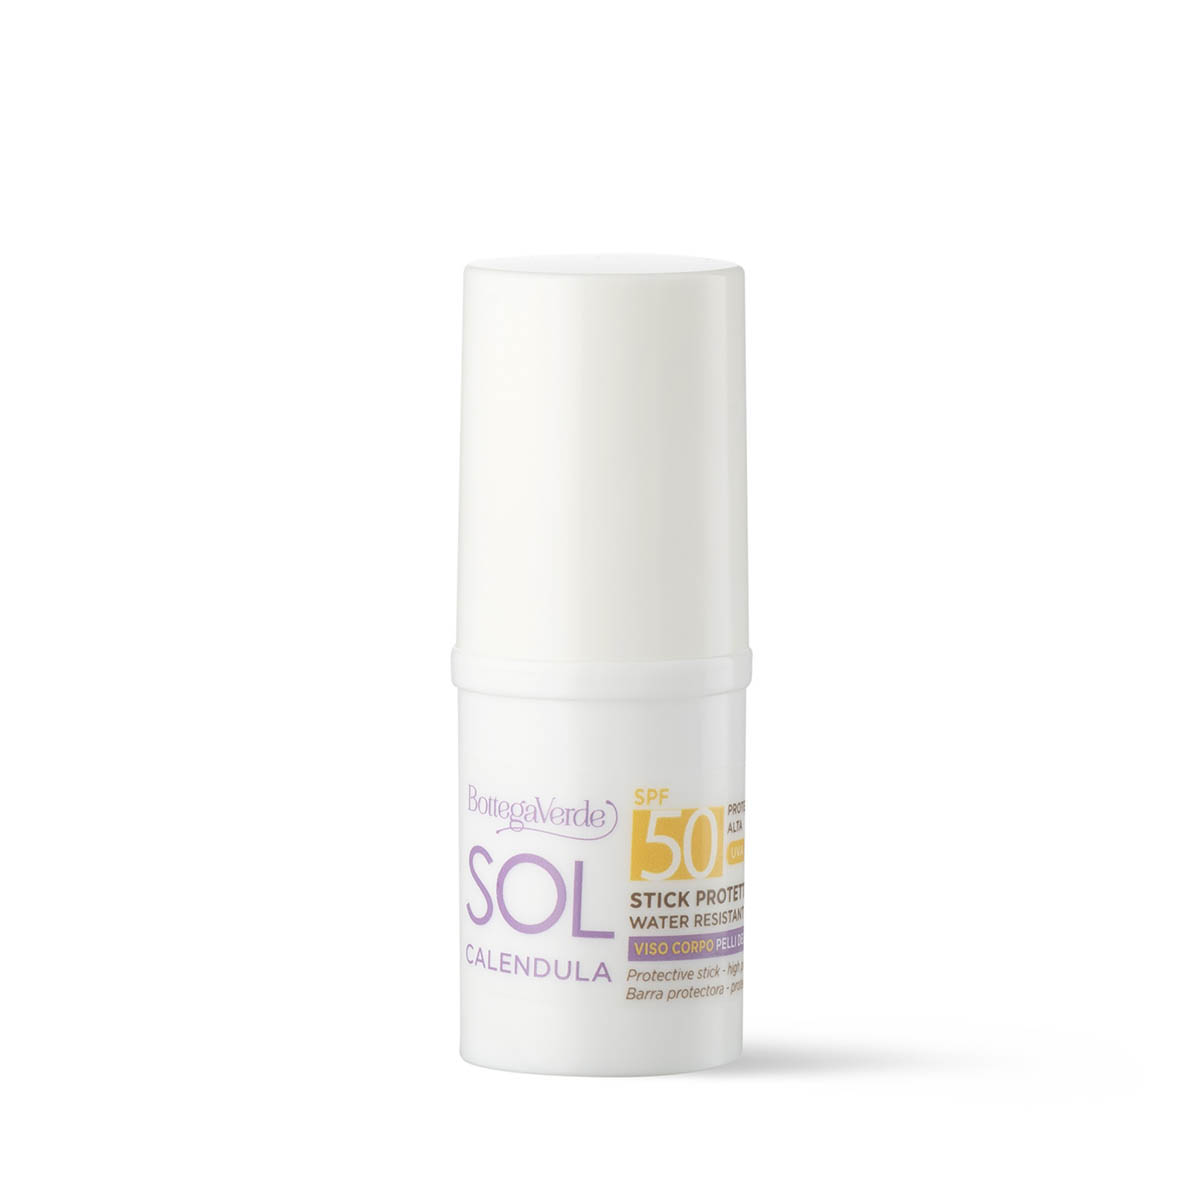 SOL Calendula - Protective stick - face and body - delicate skin - for the whole family* - with Calendula extract from Tenuta Massaini - SPF 50 high protection (15 ml) - water resistant